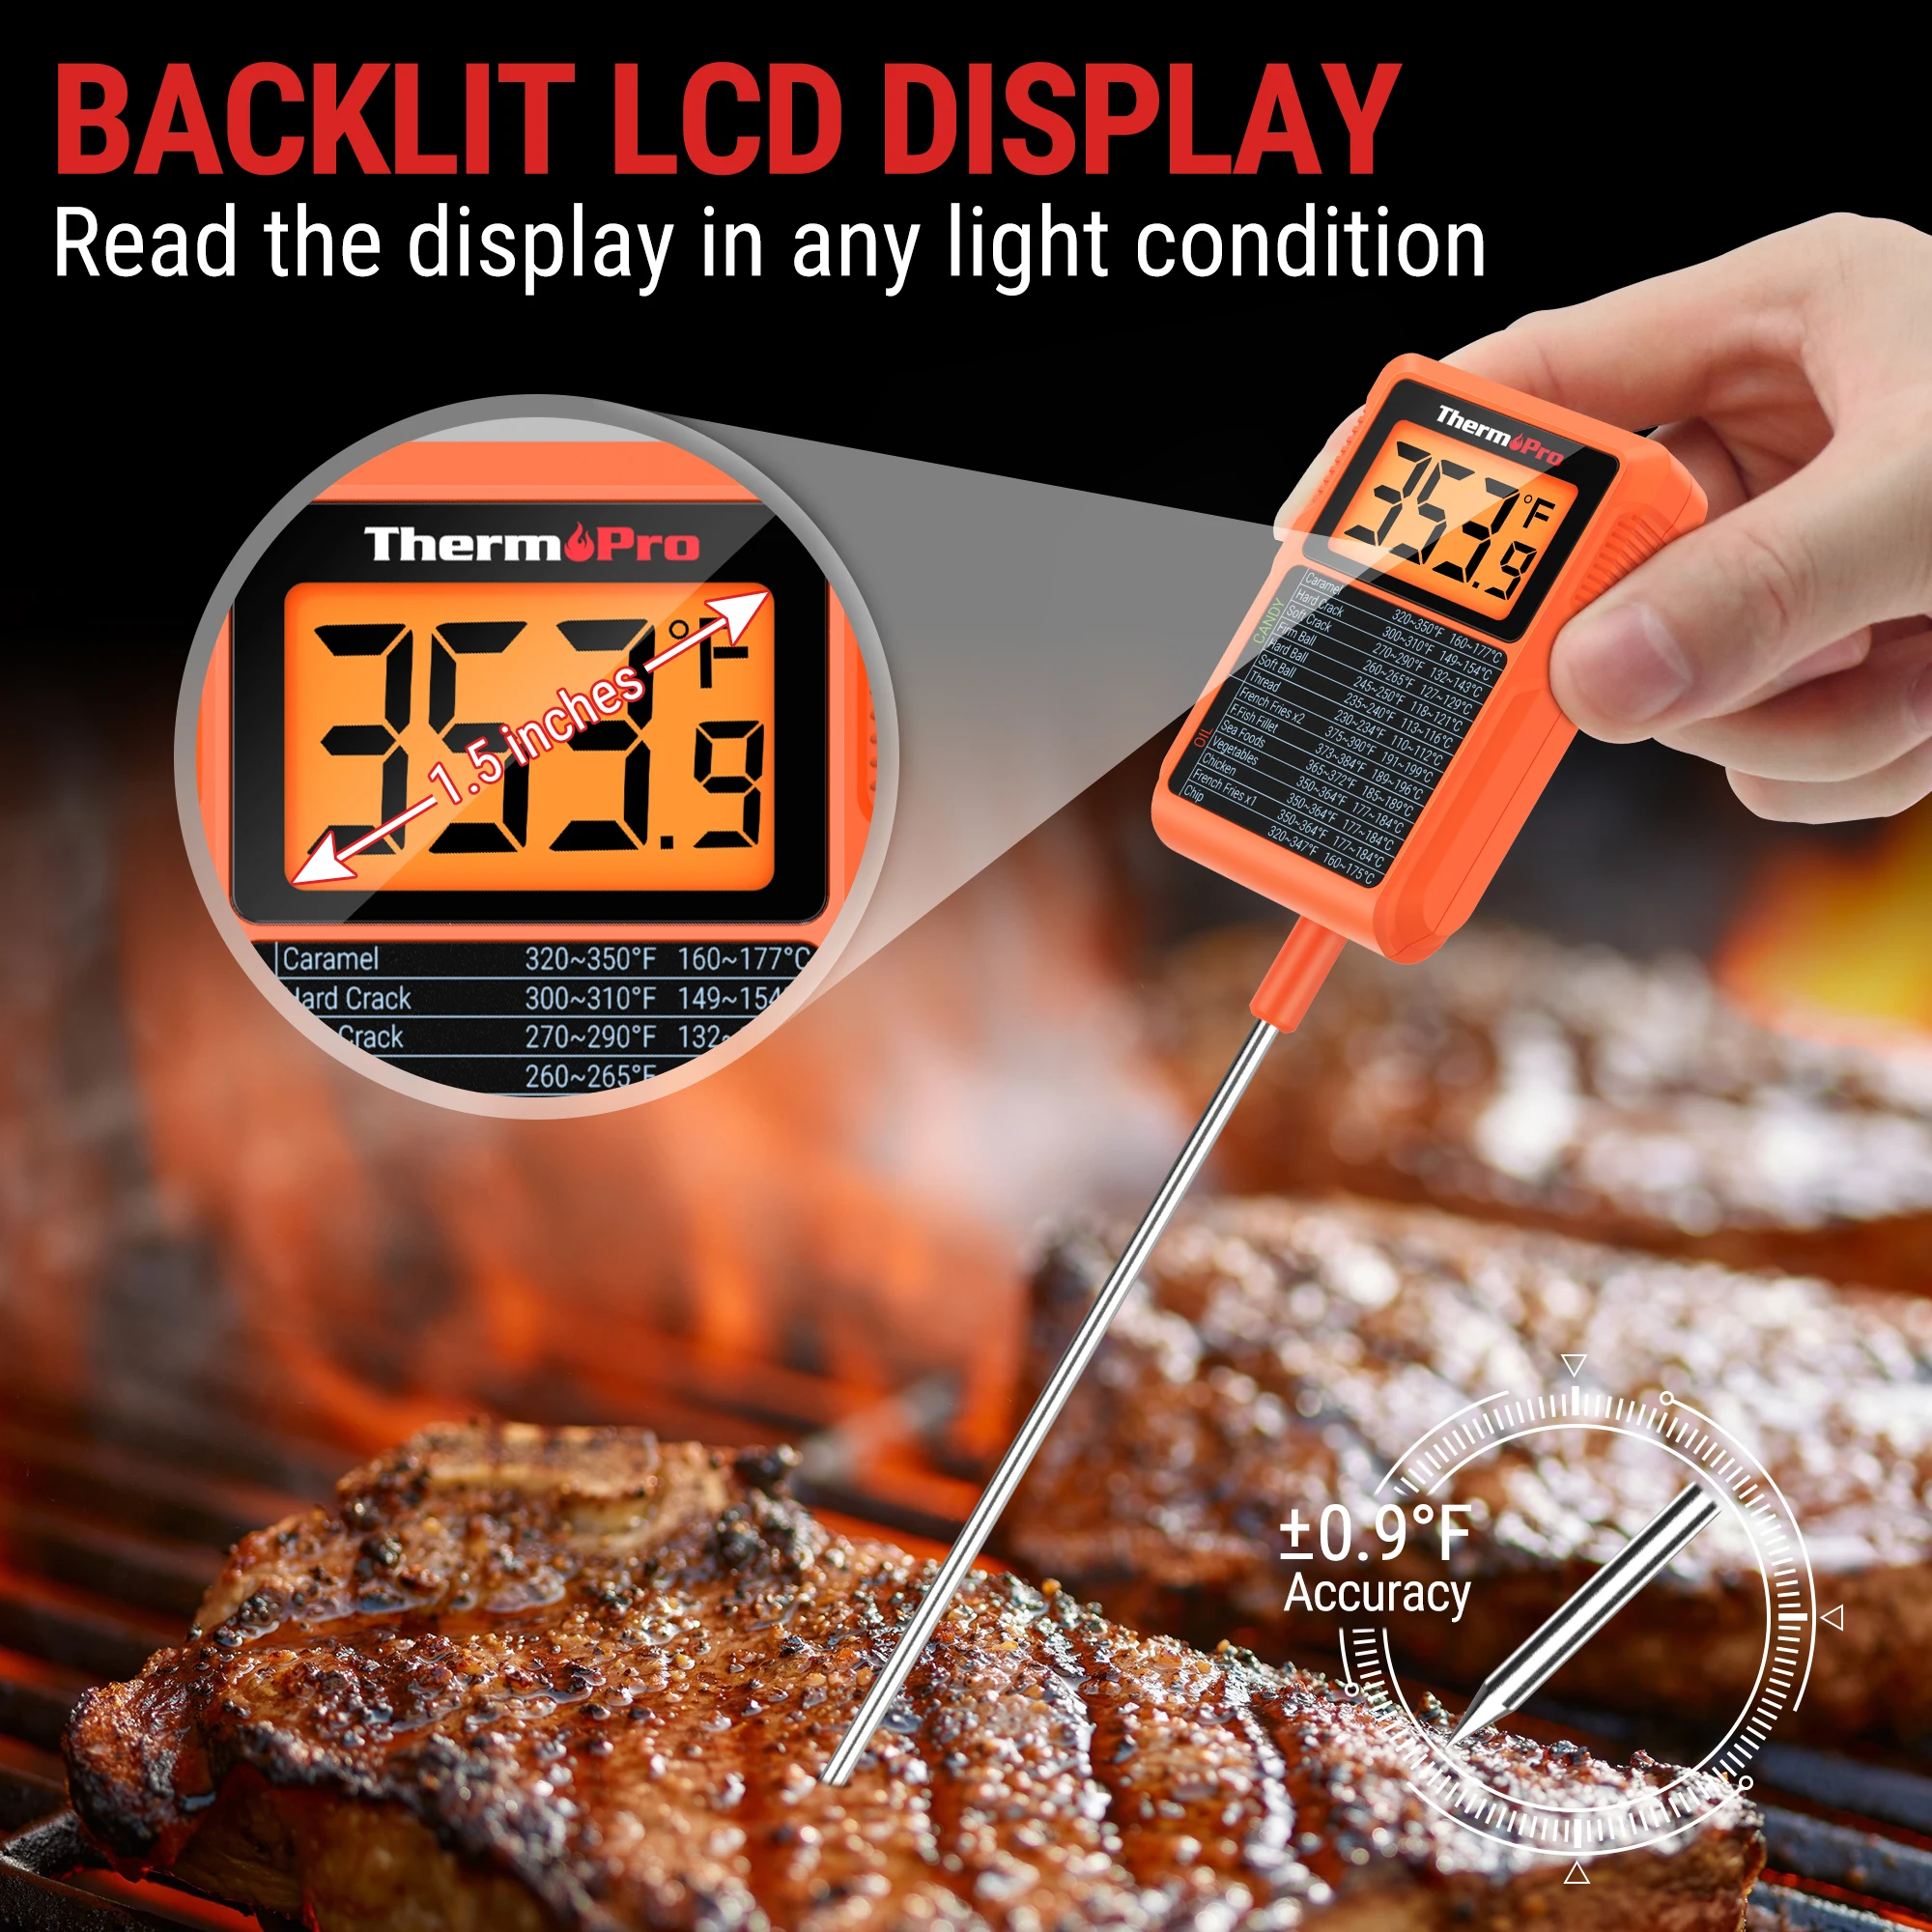 https://ae01.alicdn.com/kf/S86c018c977d848d58552a8b126fdb487x/ThermoPro-TP510-Waterproof-Digital-Instant-Reading-BBQ-Meat-Oven-Grill-Thermometer-For-Kitchen-Cooking-Household-Use.jpg